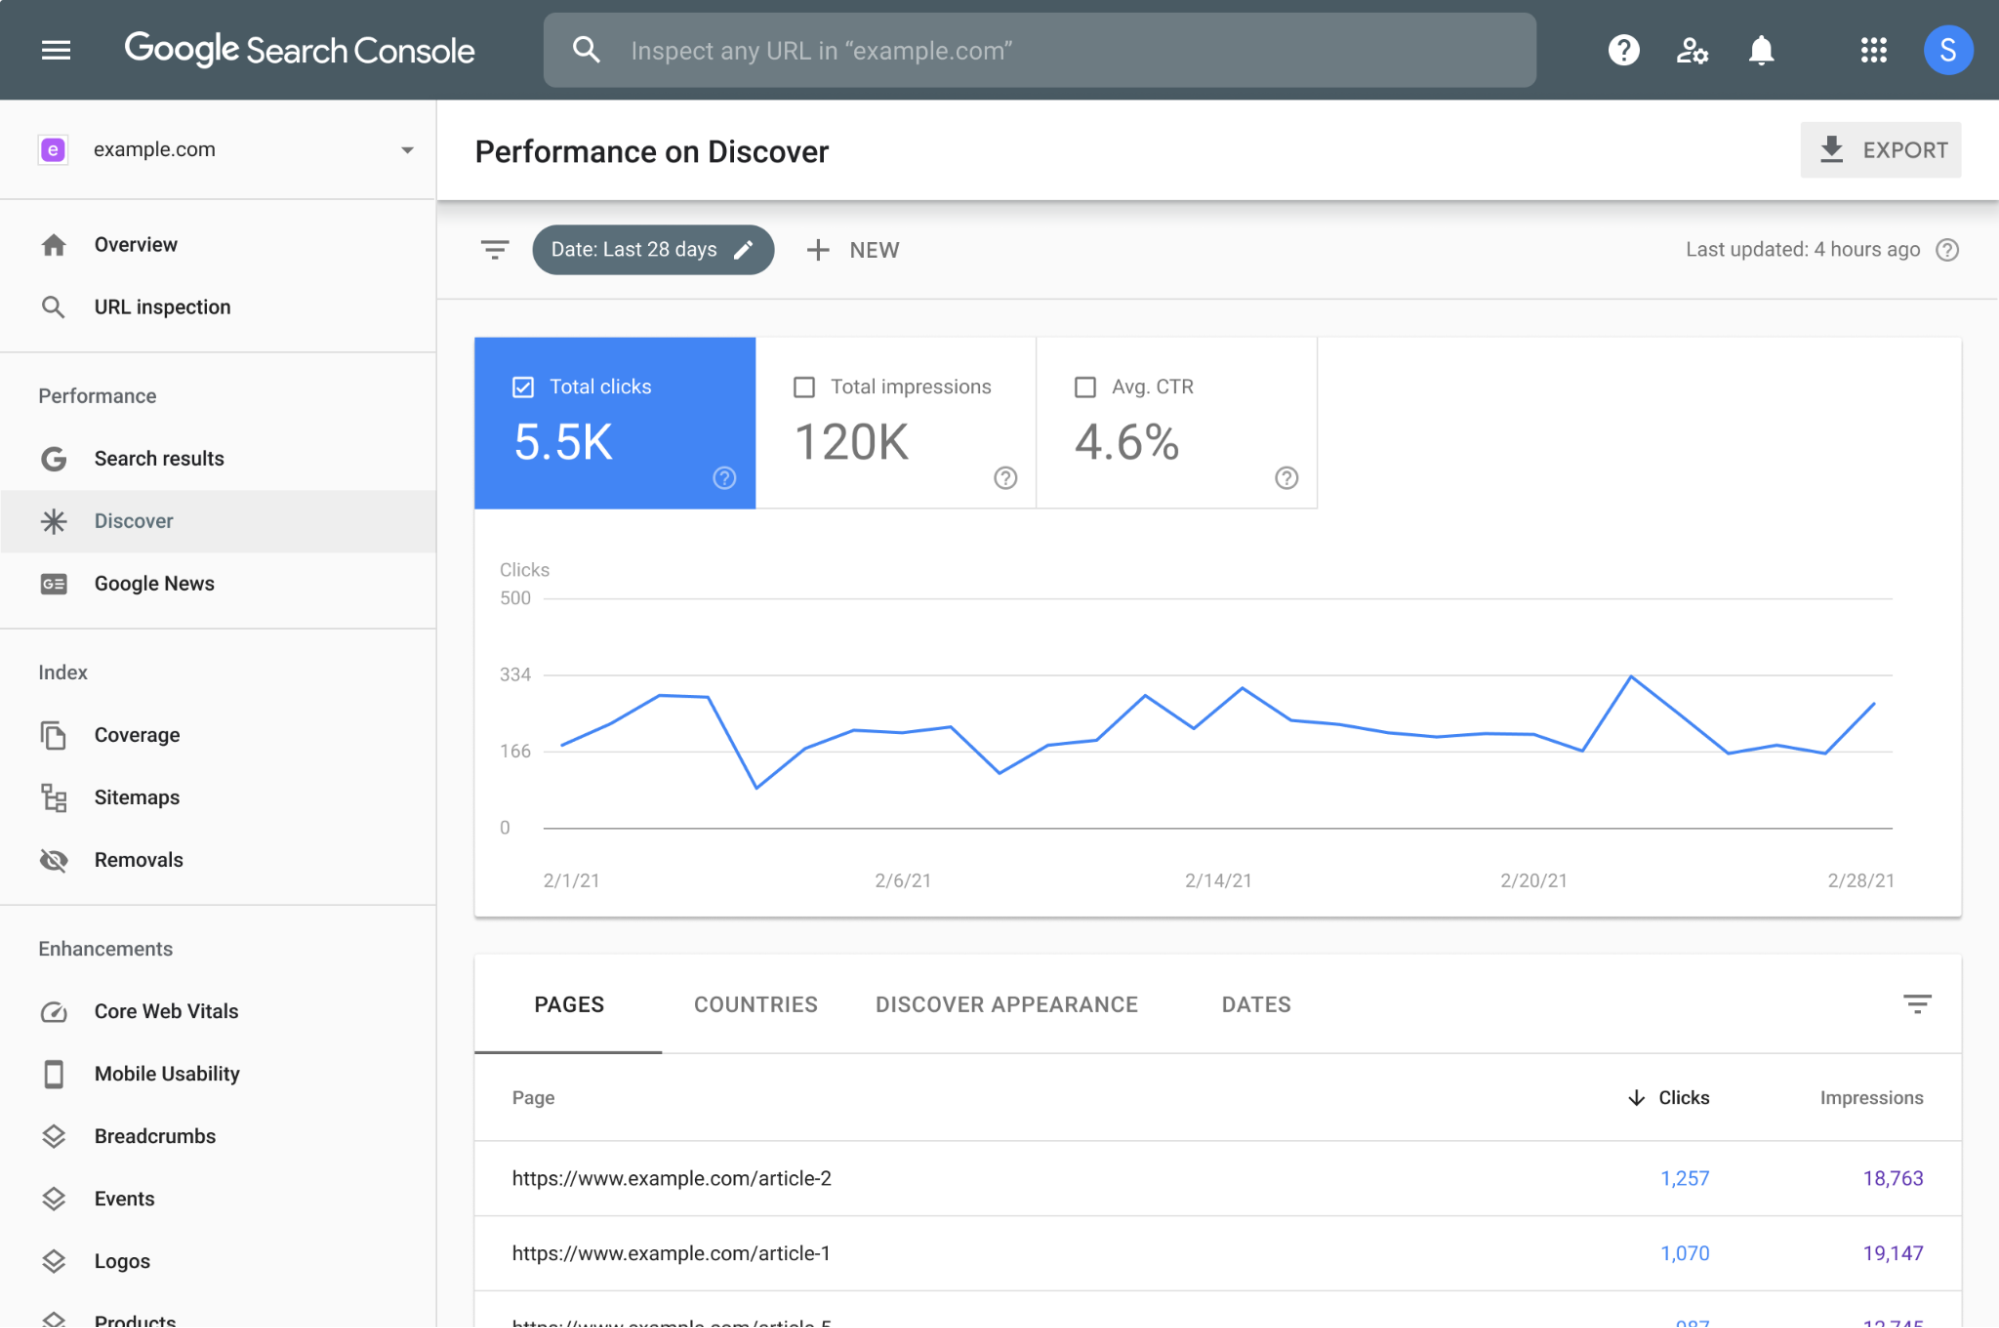 Google Search Console is an important analytical SEO tool